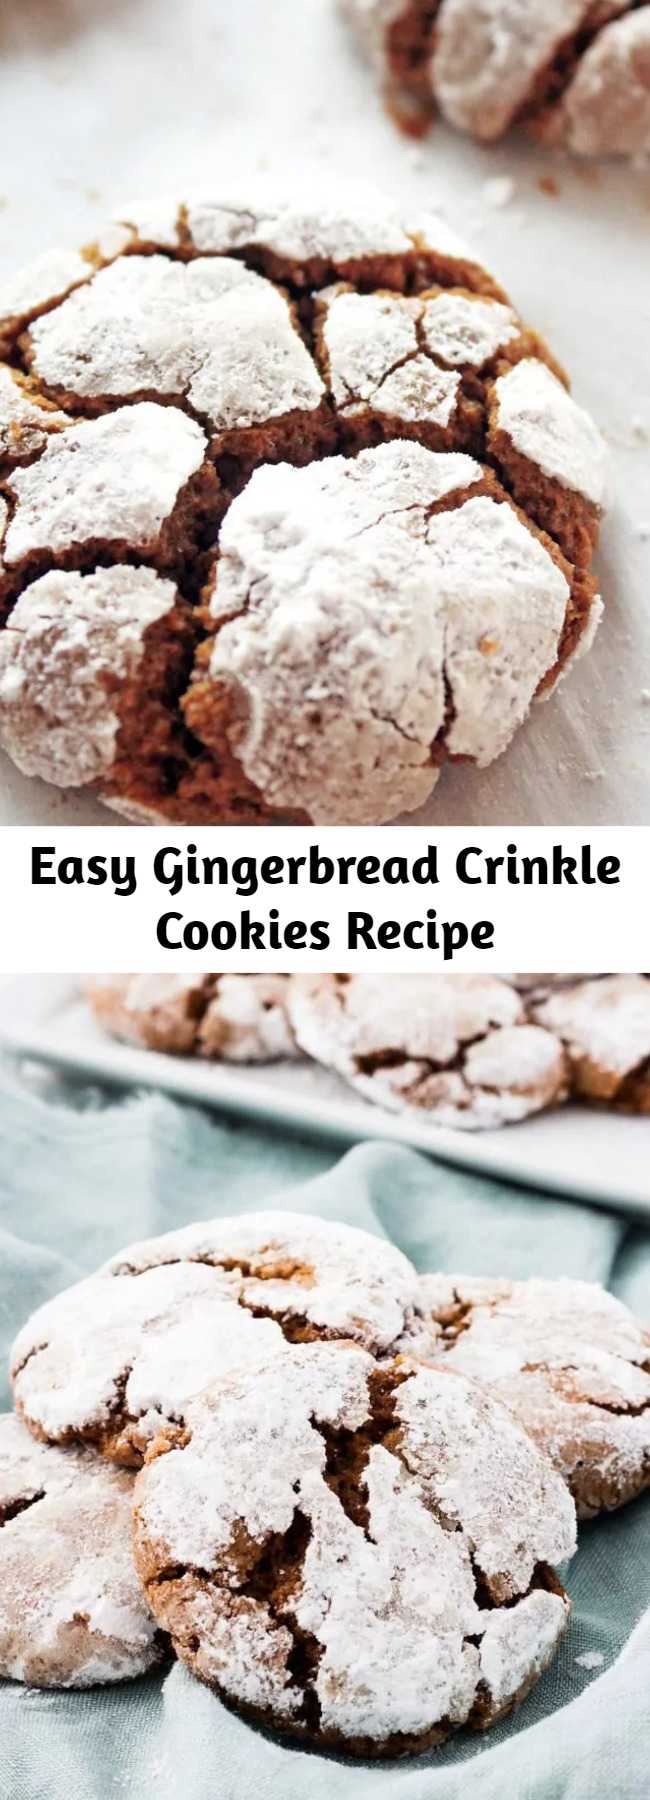 Easy Gingerbread Crinkle Cookies Recipe - Gingerbread crinkle cookies are a must-try during the holidays. They are chewy, full of ginger flavor and coated in sugar with exposed cookie cracks.